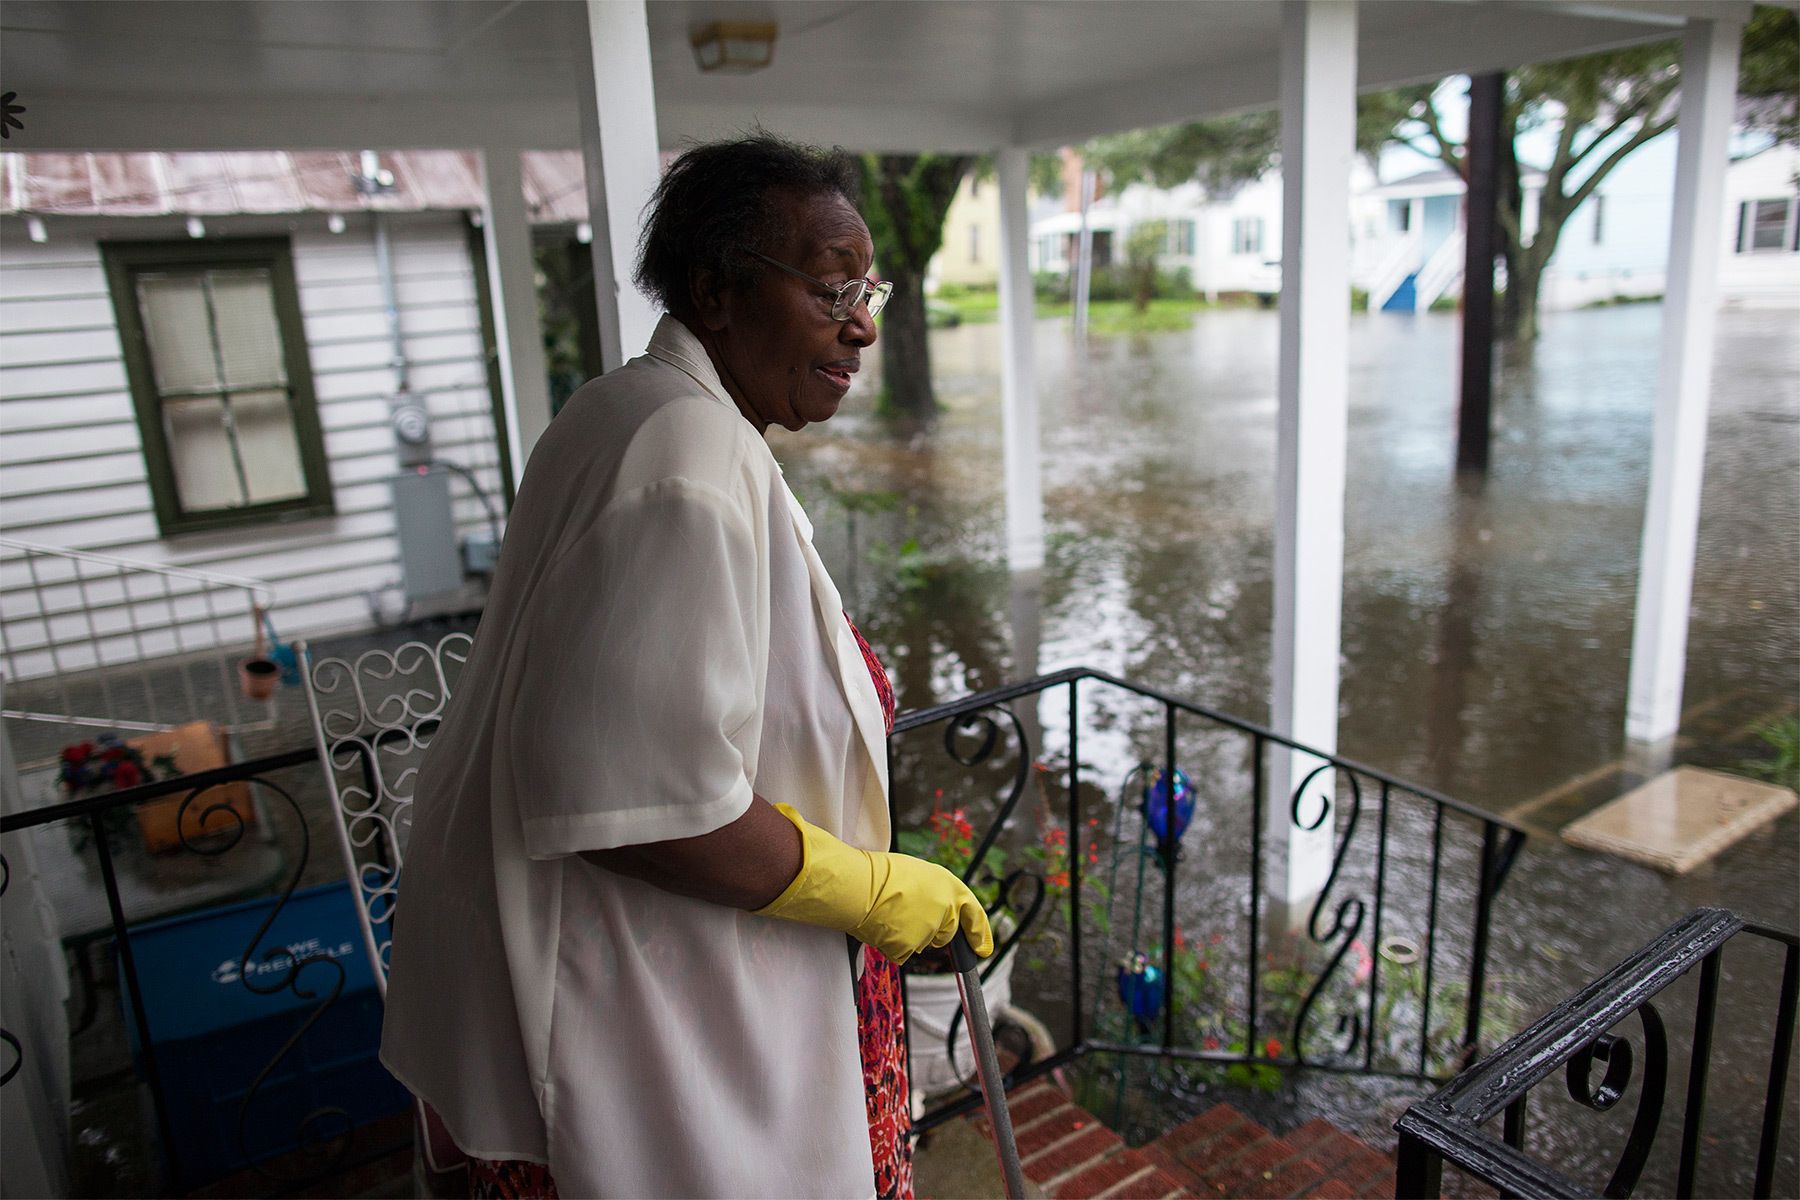 Ammie McKnight watches the level of flood waters in the front yard her Orange Street home in Georgetown, South Carolina October 4, 2015. Most major roads through the historical South Carolina city have closed due to flooding. Vast swaths of U.S. Southeast and mid-Atlantic states were grappling with heavy rains and flooding from a separate weather system which has already caused at least five deaths, washed out roads and prompted evacuations and flash flood warnings. REUTERS/Randall Hill